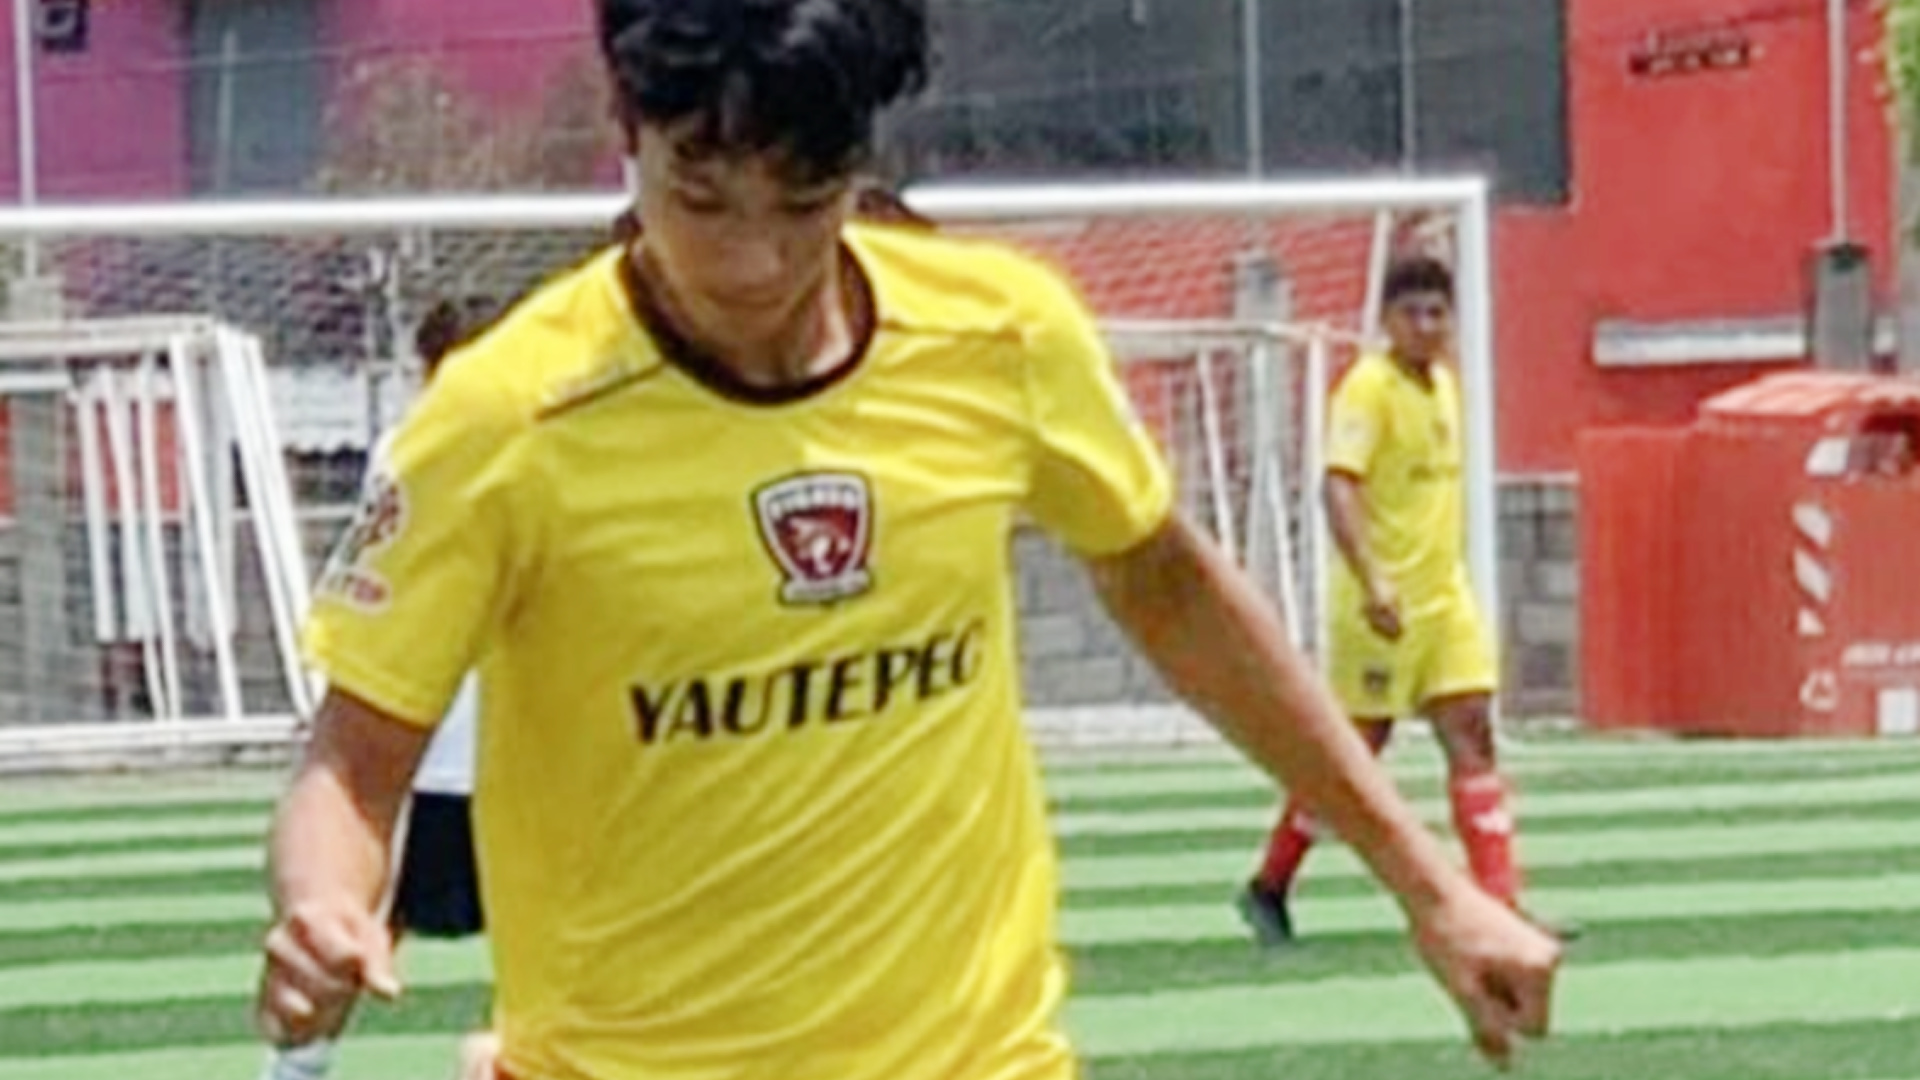 Tragedy in Mexico: Young soccer player dies after being stuck by lightning